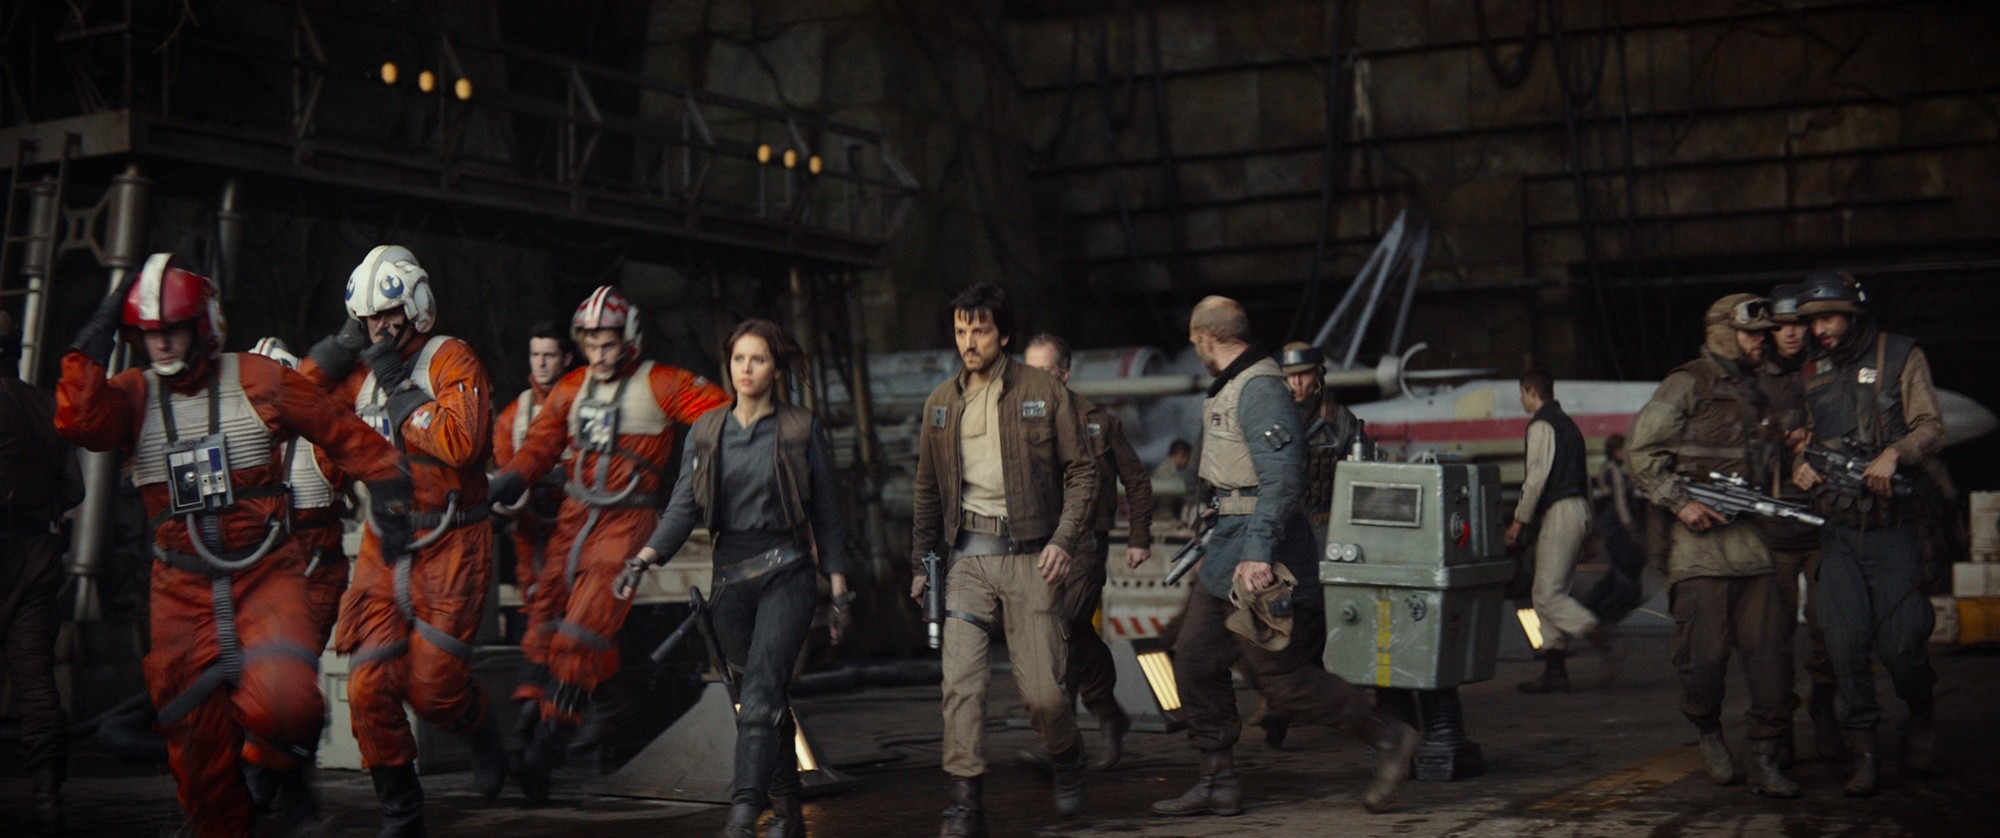 Felicity Jones (stars as Jyn Erso) and Diego Luna in Walt Disney Pictures' Rogue One: A Star Wars Story (2016)